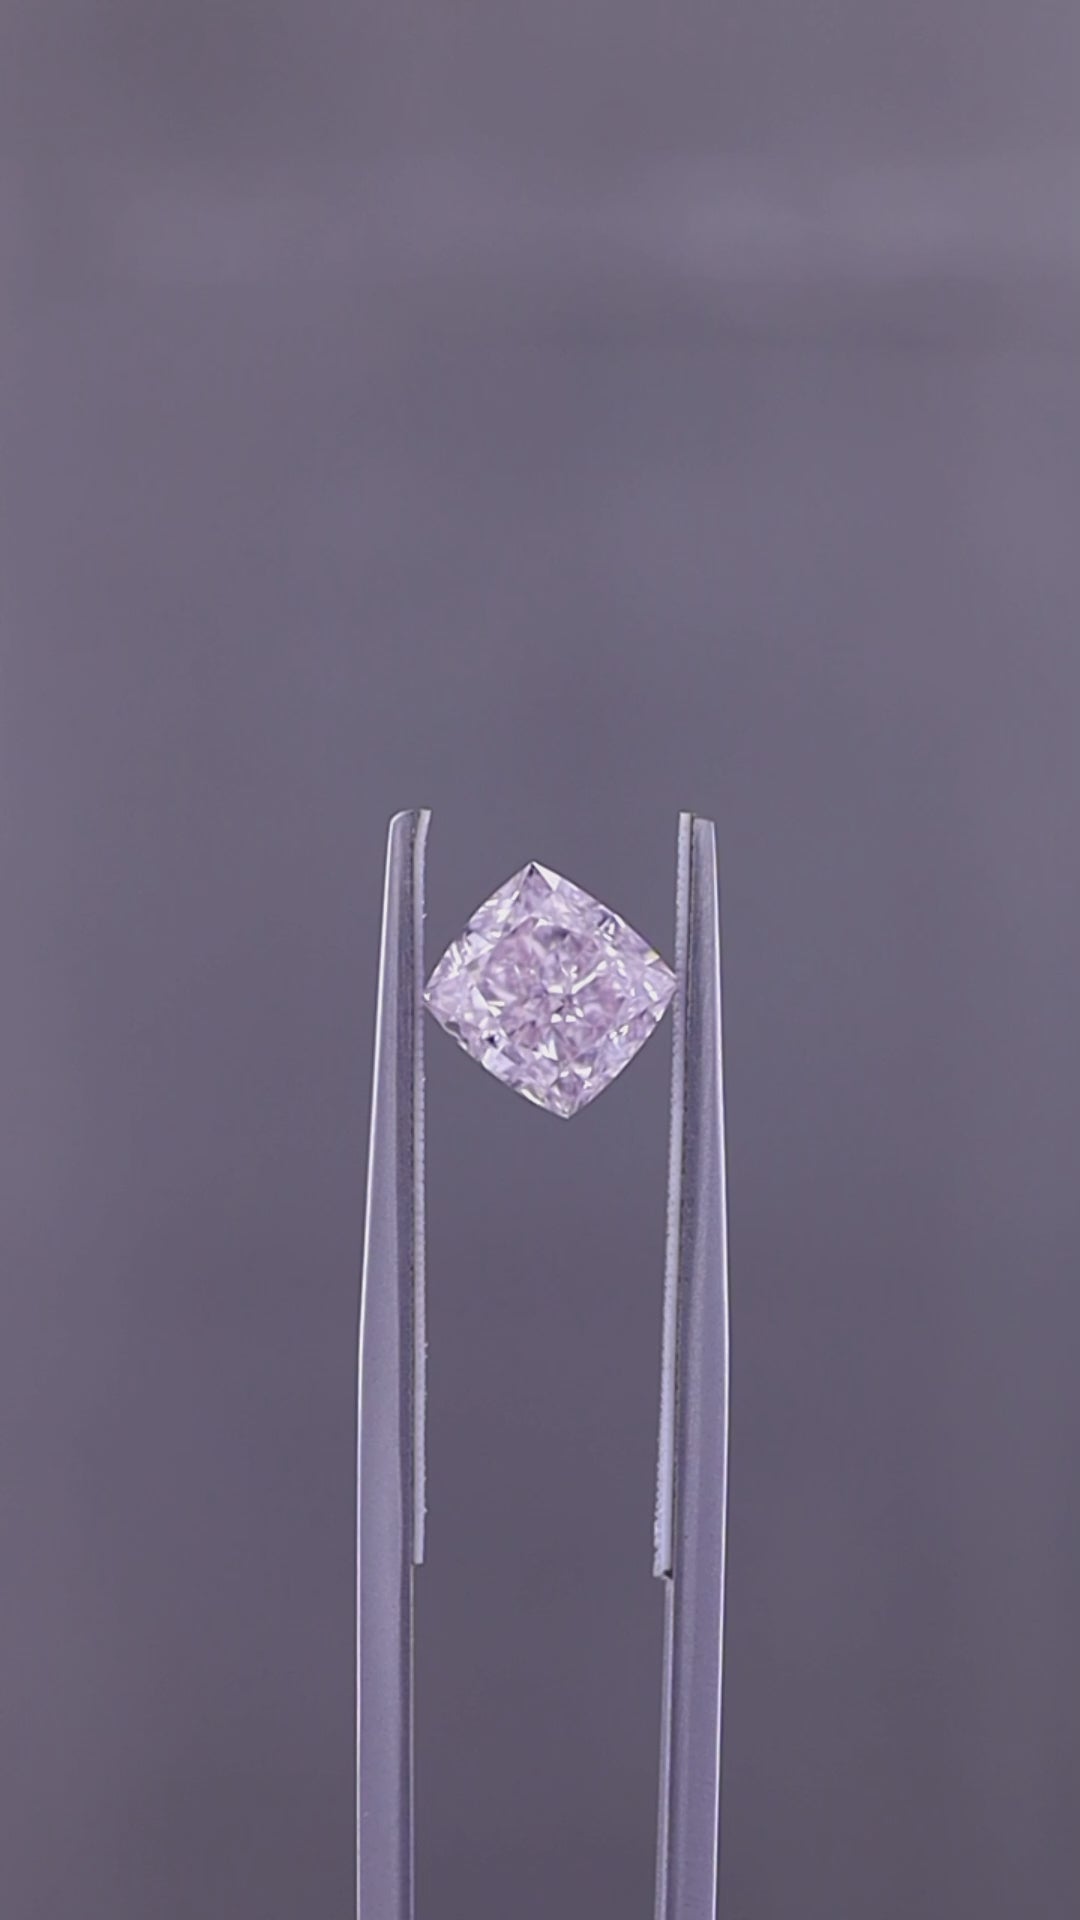 Explore the exceptional 1.94-carat Fancy Pink diamond, a rare and captivating gem mined in Botswana. GIA certified with VVS1 clarity, this exquisite diamond is available in Geneva by special request. Secure this unique investment and timeless symbol of luxury today.